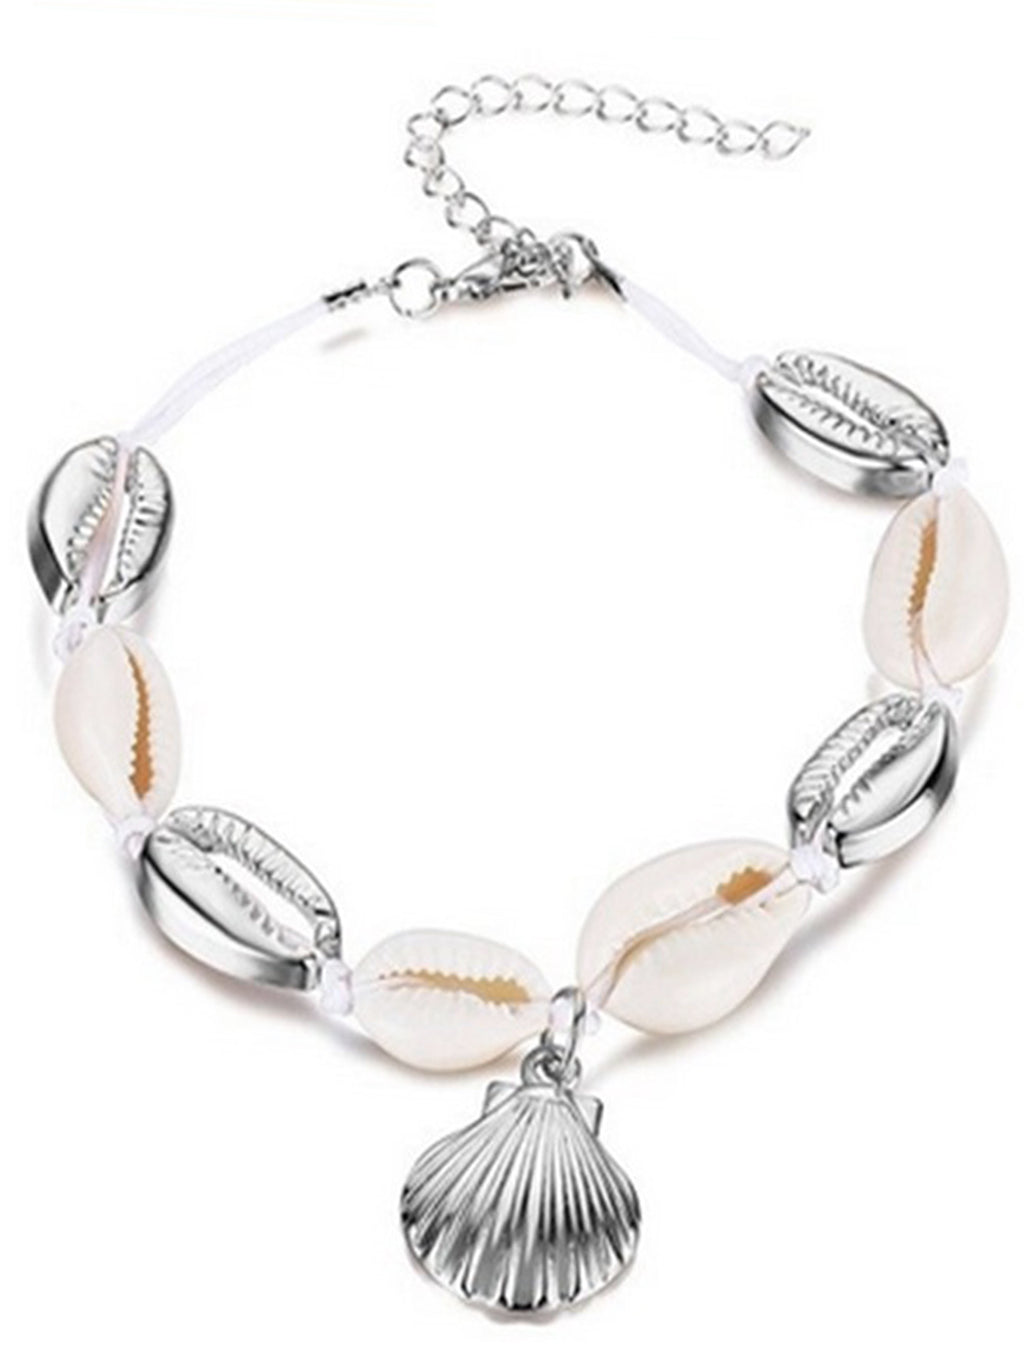 Silver Tone Cowrie Seashell Anklet With Dangle